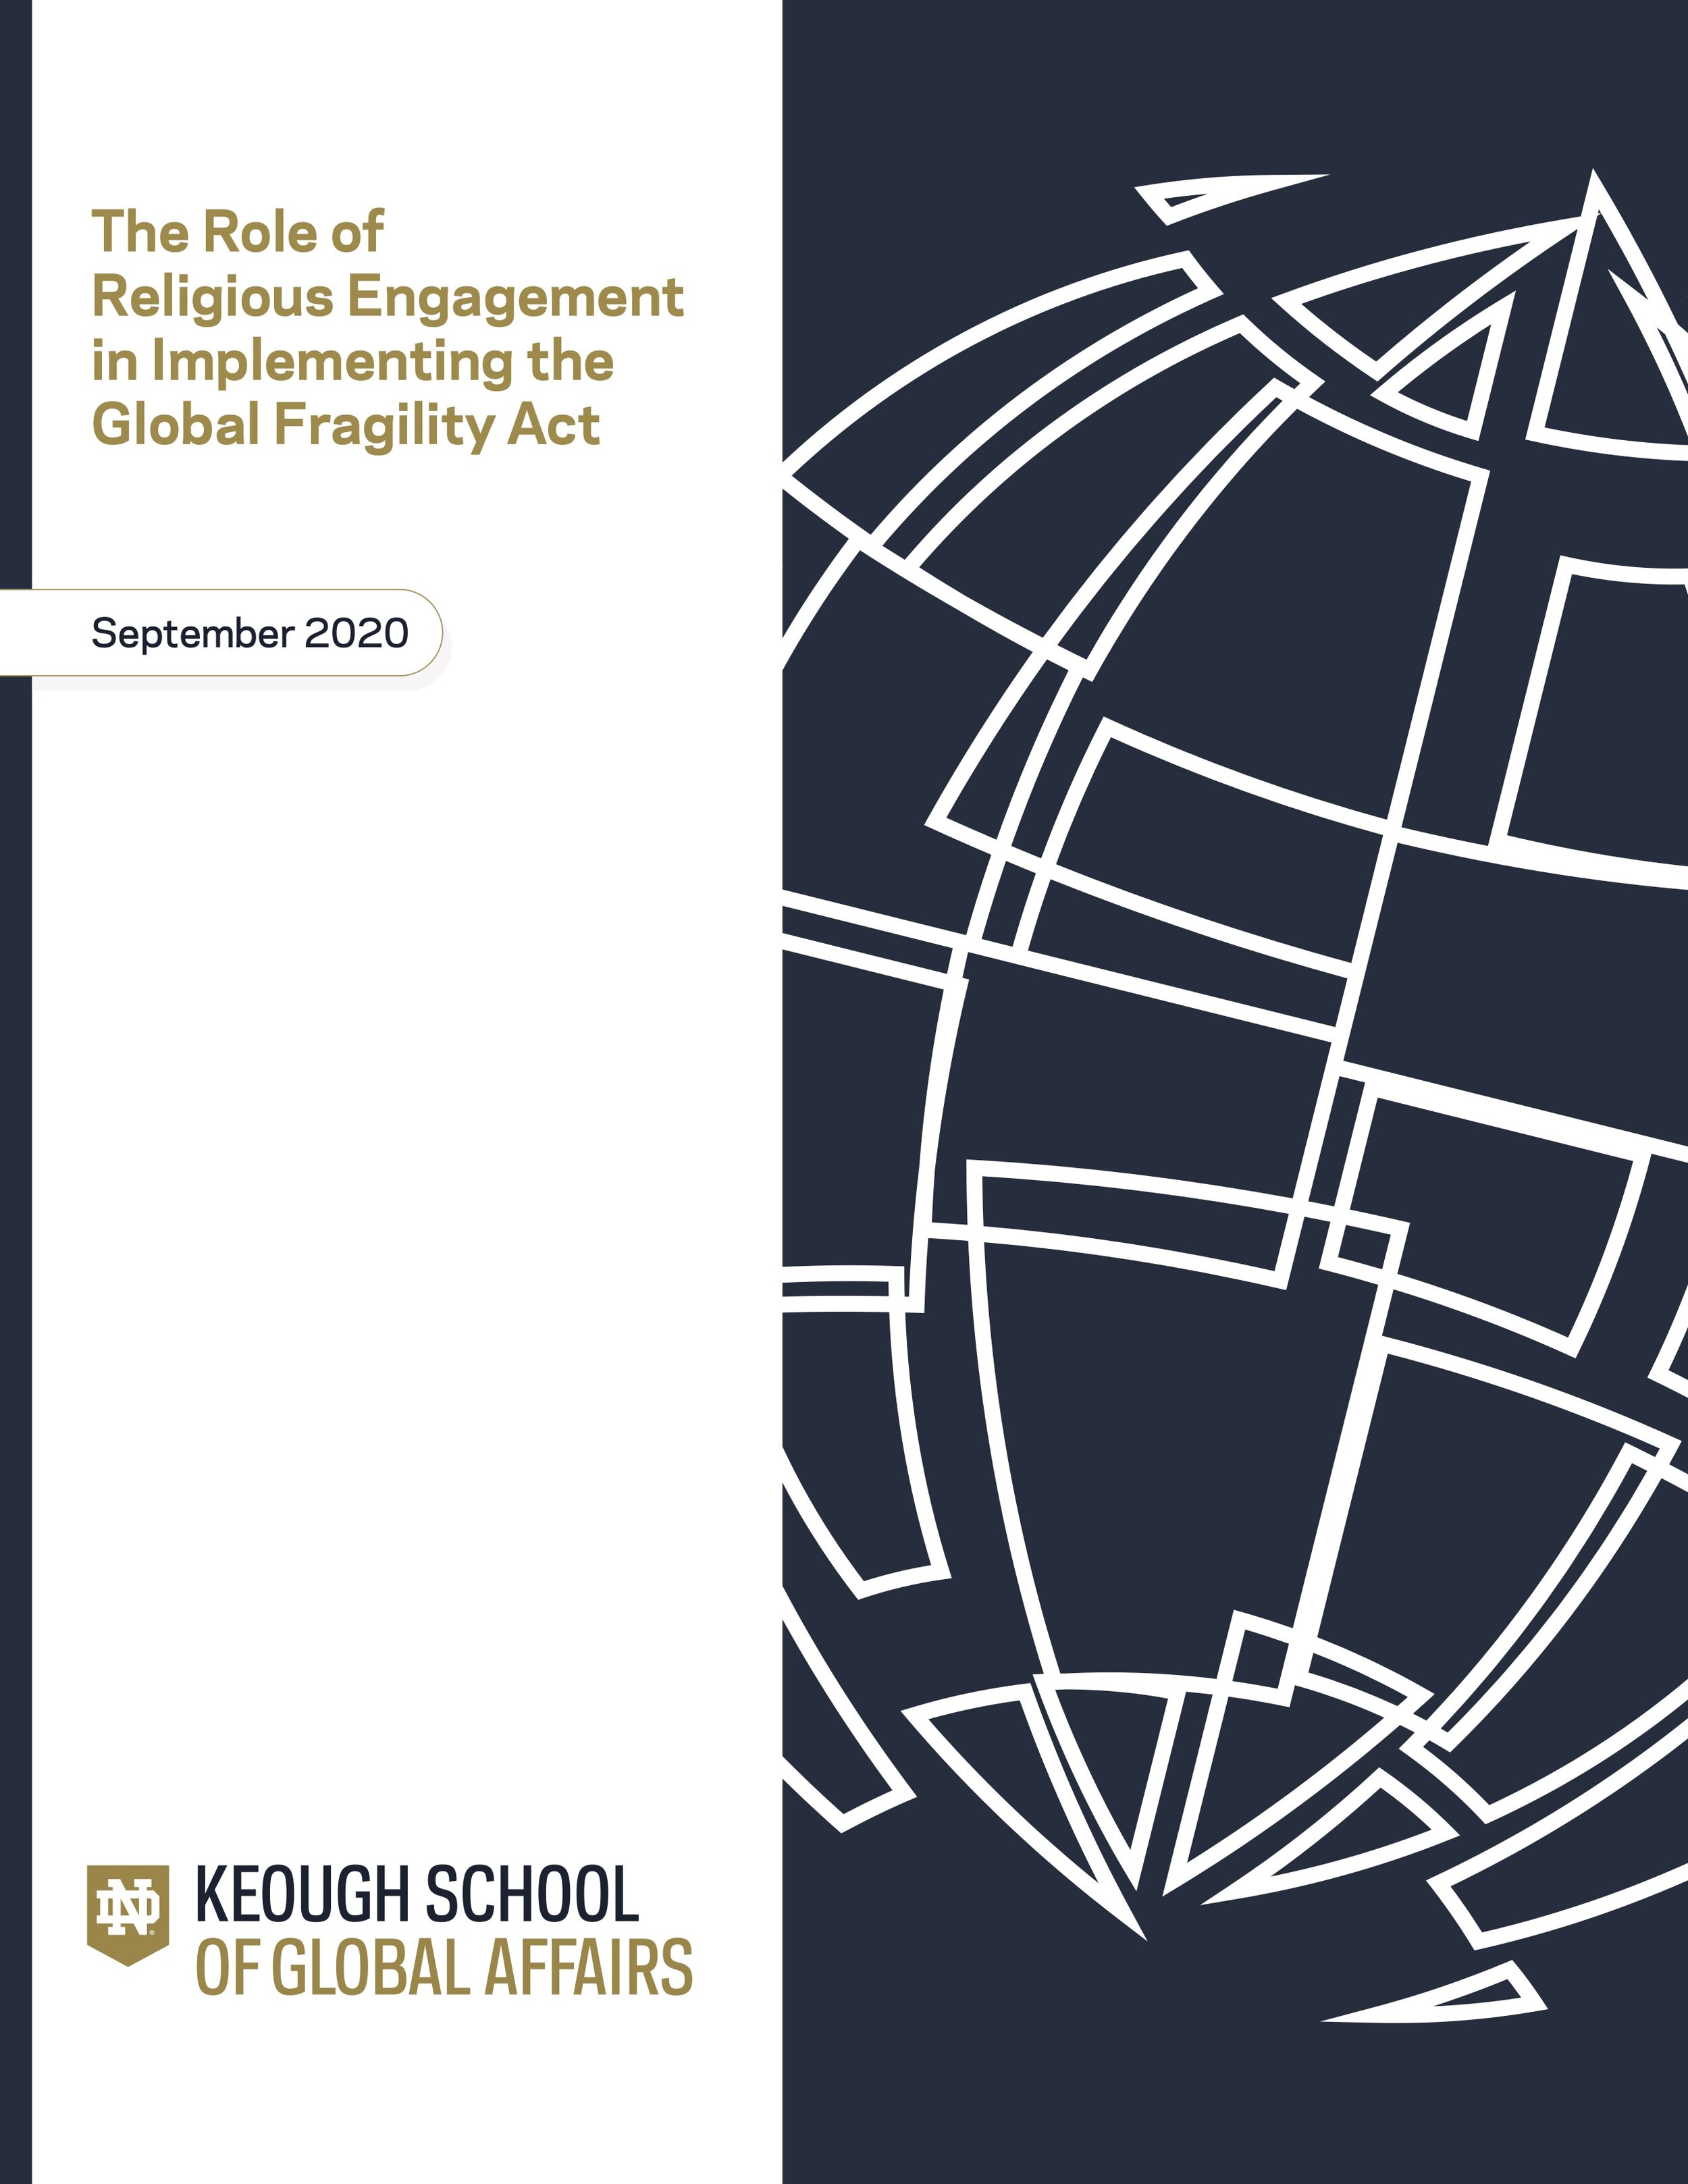 The Role of Religious Engagement in Implementing the Global Fragility Act (1).jpg